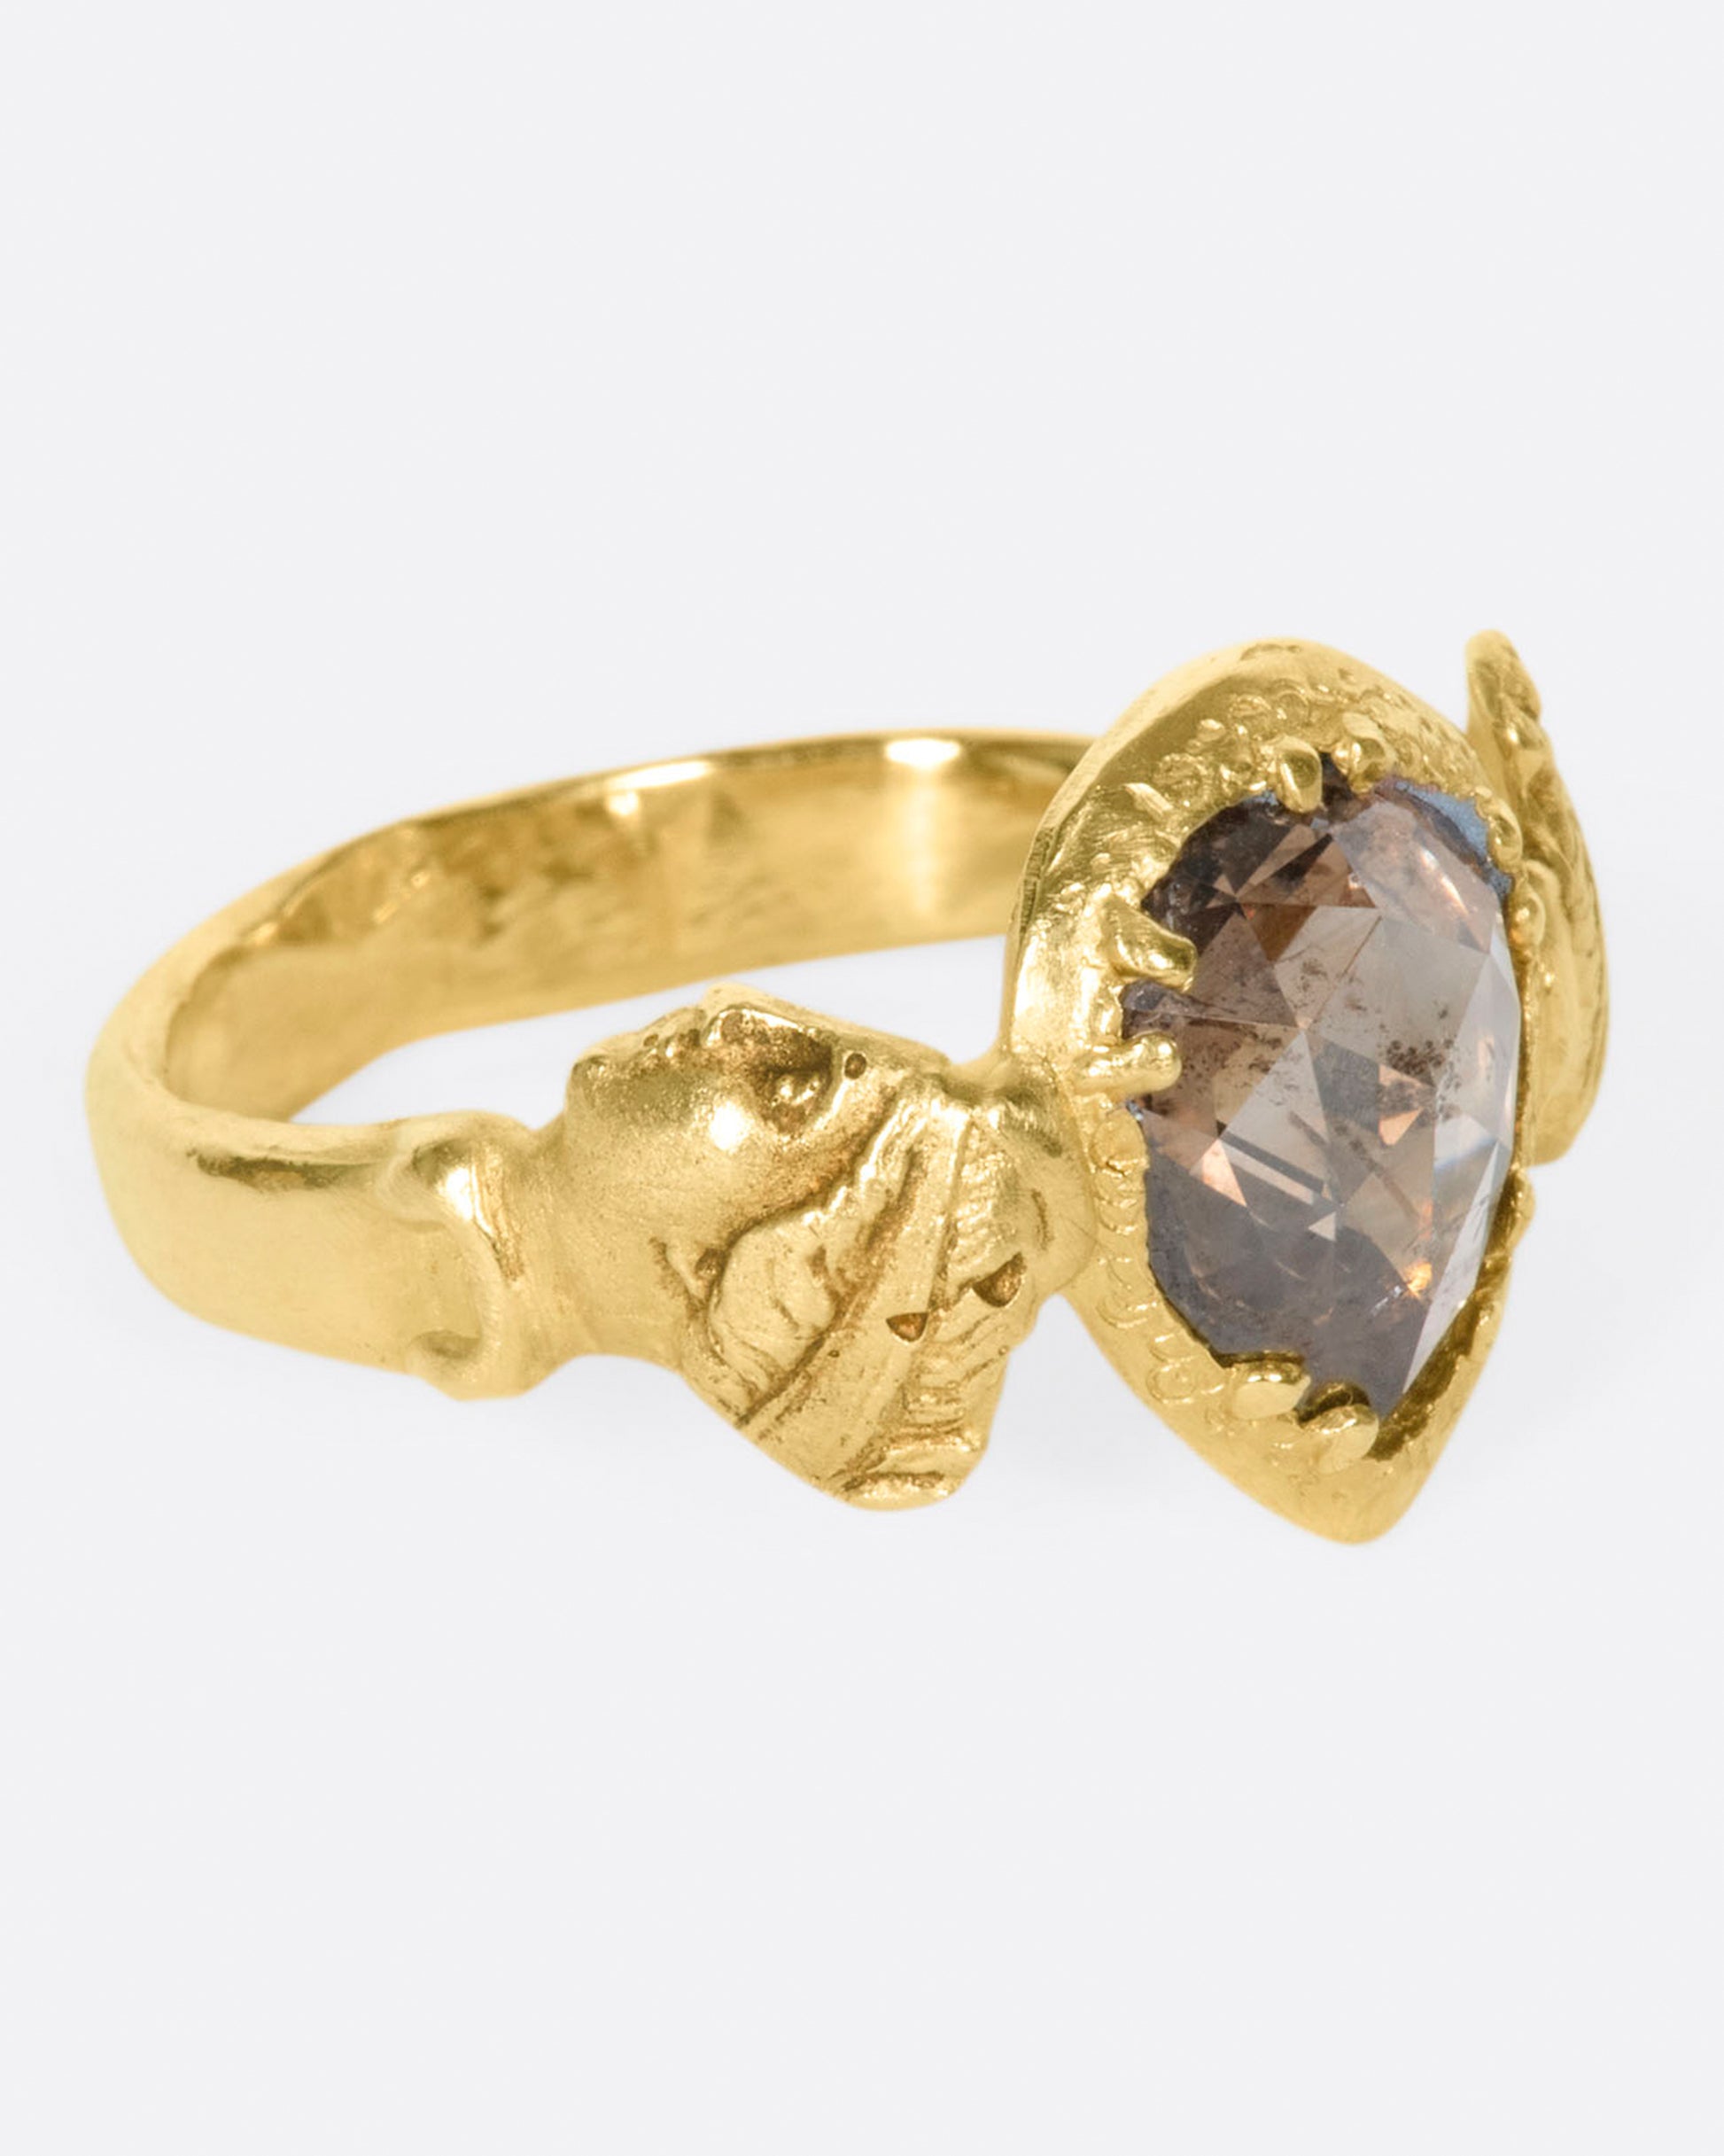 This moody pear-shaped cognac diamond, swirling with chocolaty hues, in an open-back setting that invites light to reflect intensely. The hand-carved bezel and band give a deeply storied feel as if this were dug up in the desert—treasure left behind by an ancient Roman civilization.